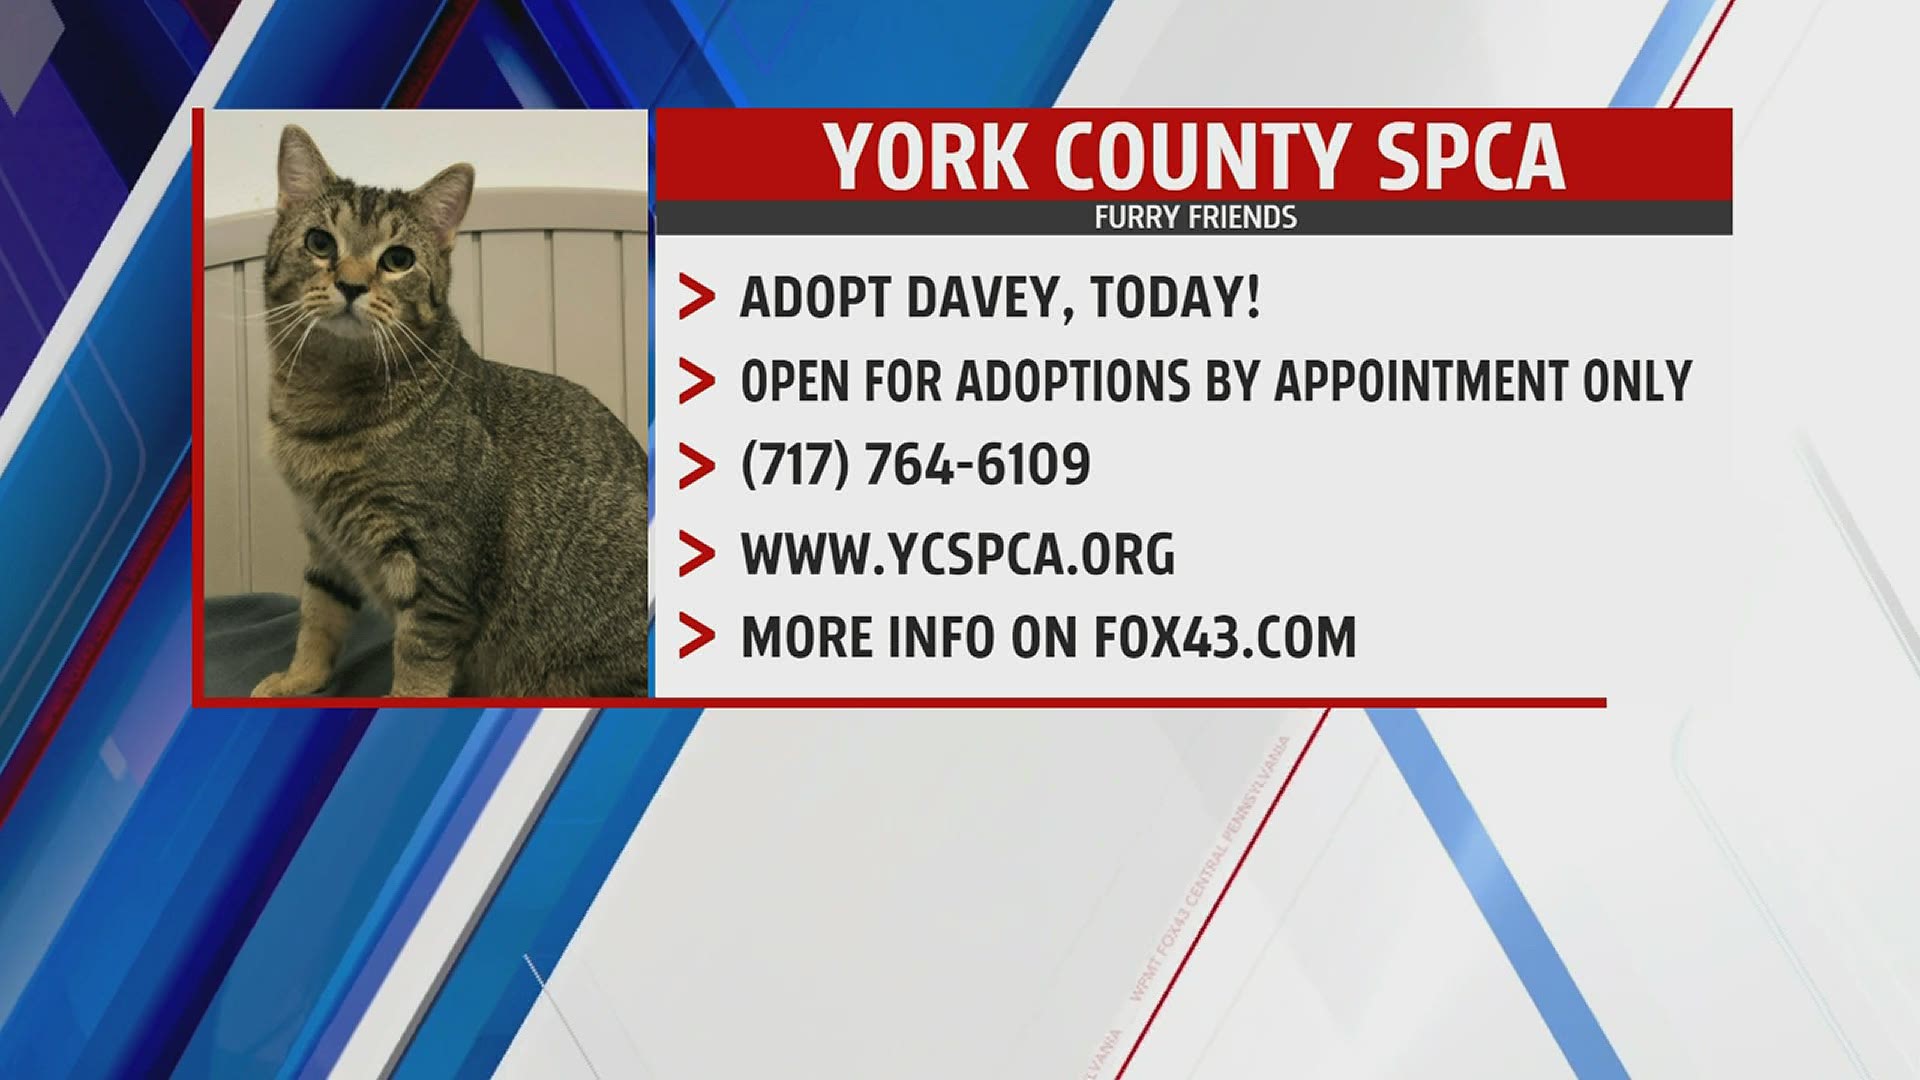 Furry Friend Davey! Adopt Davey today at the York County SPCA